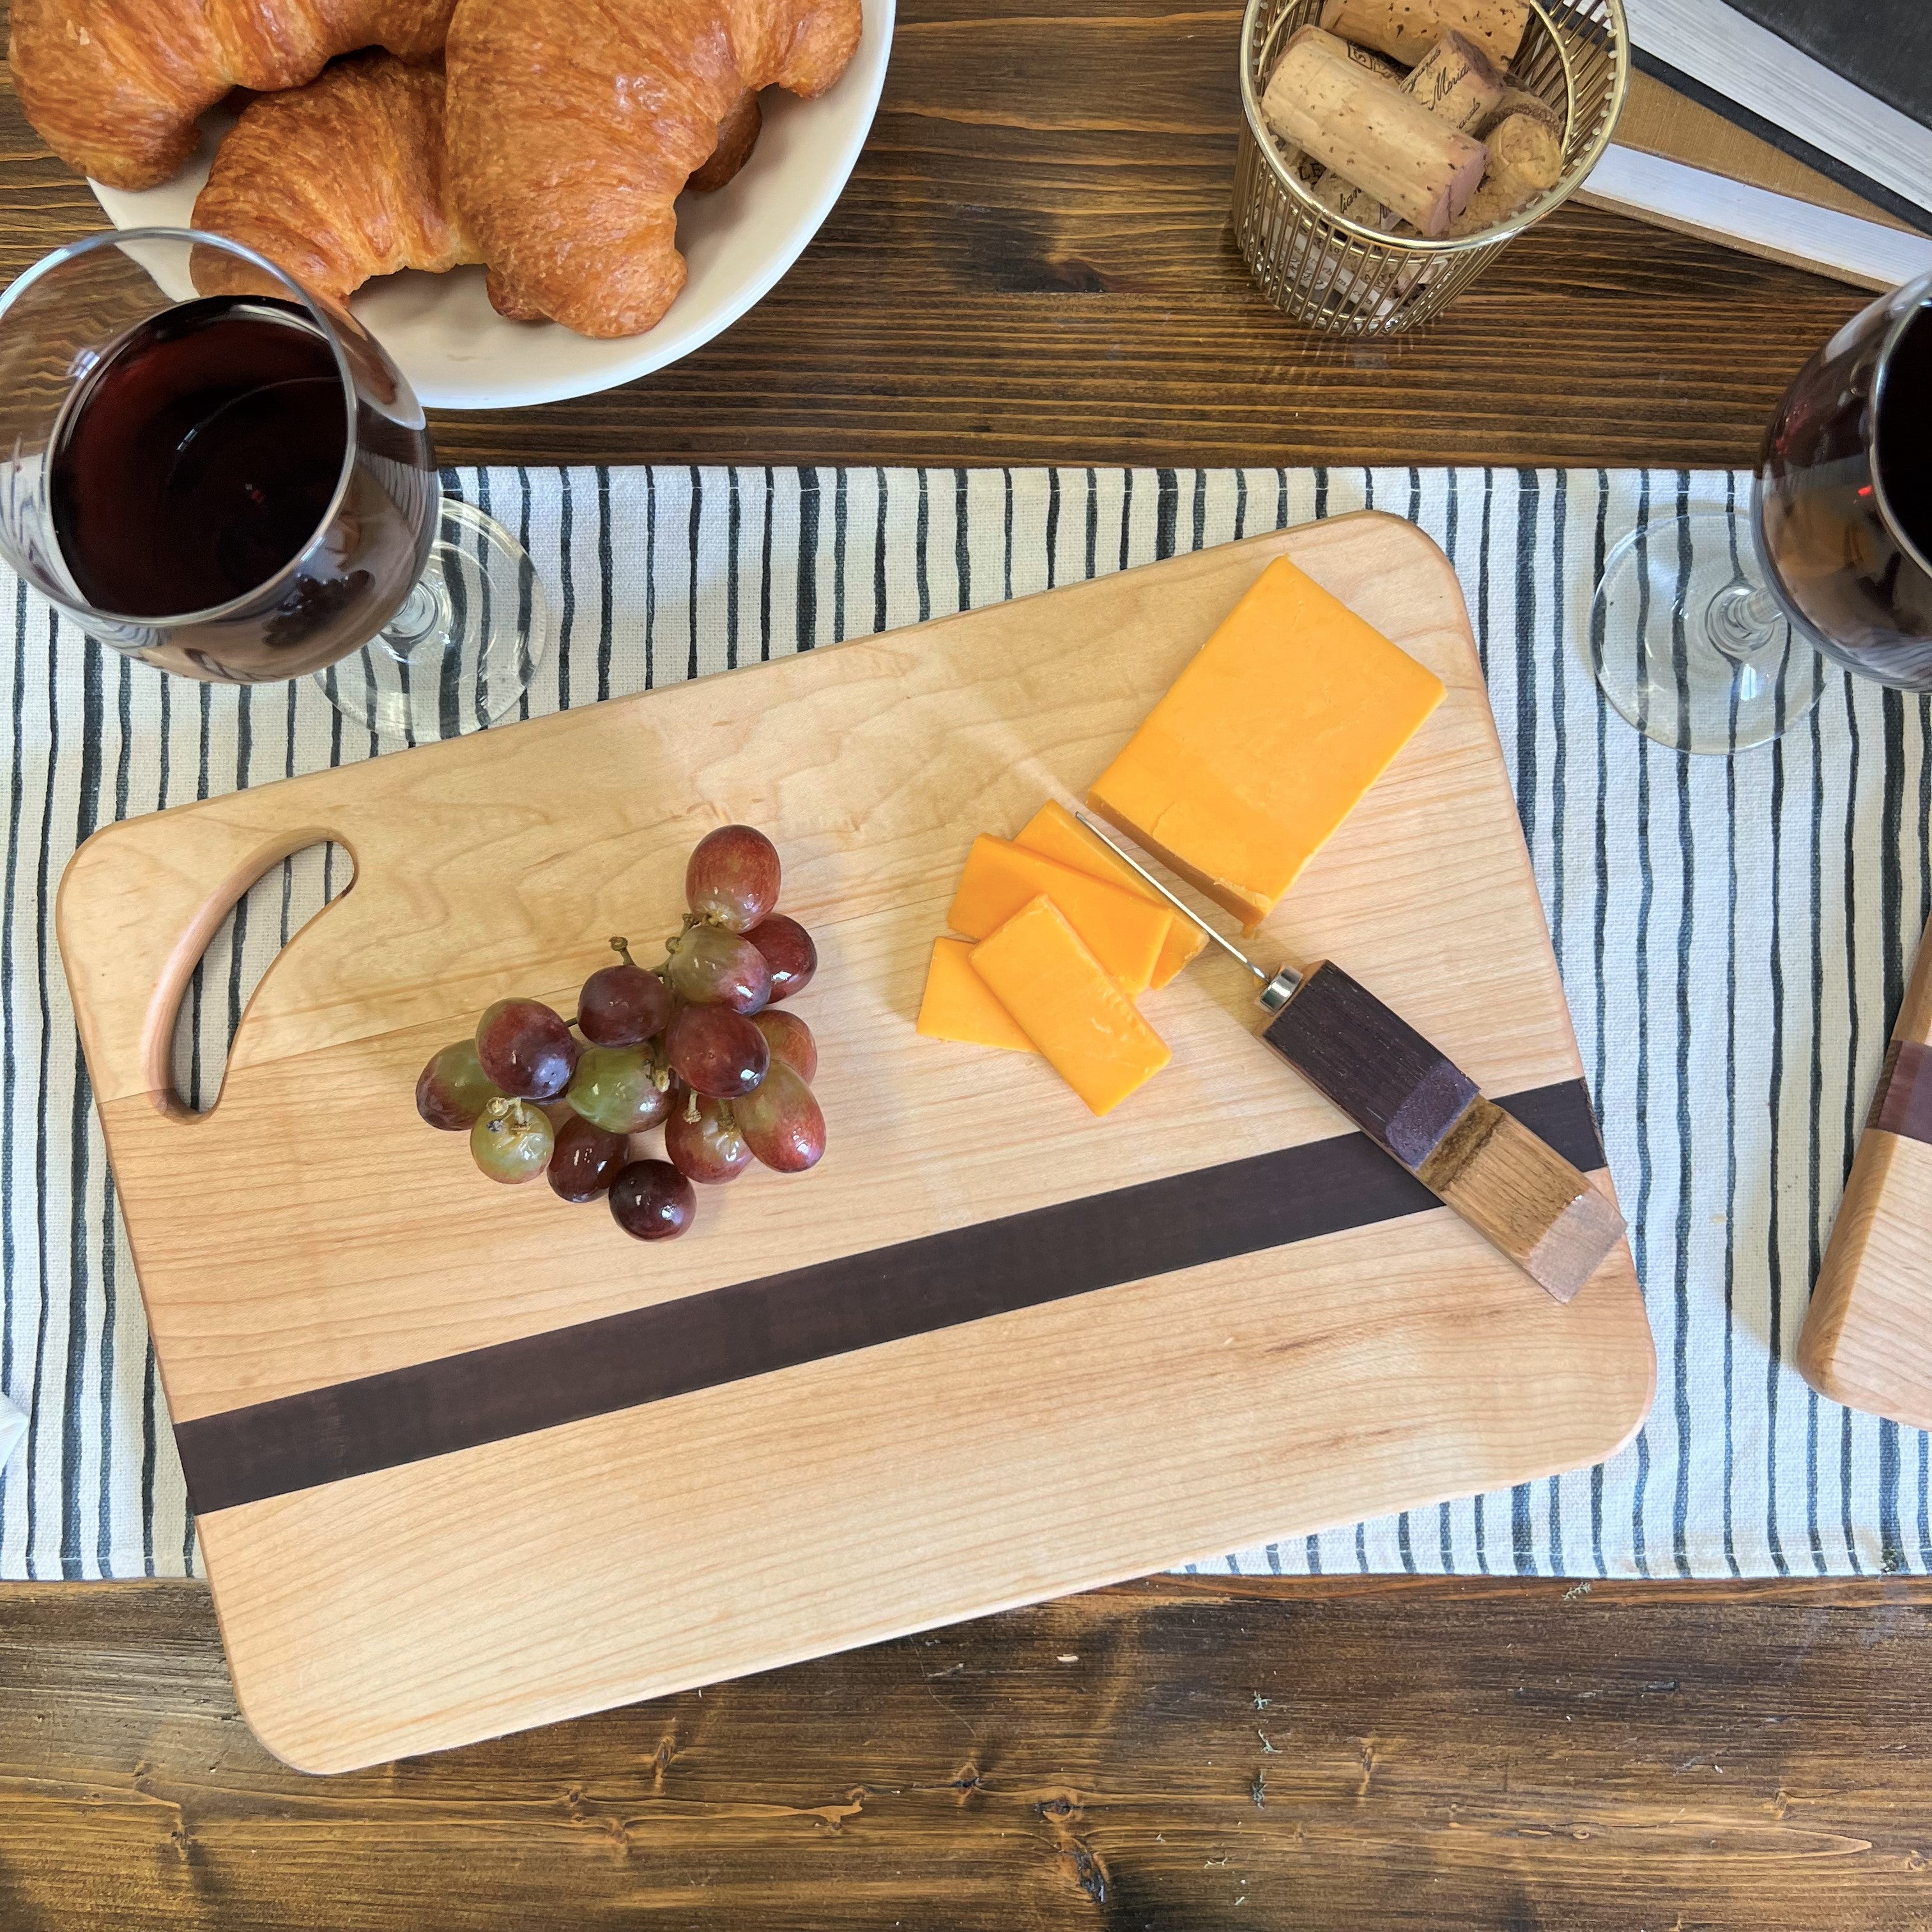 Classic Maple Cutting Board with Handle